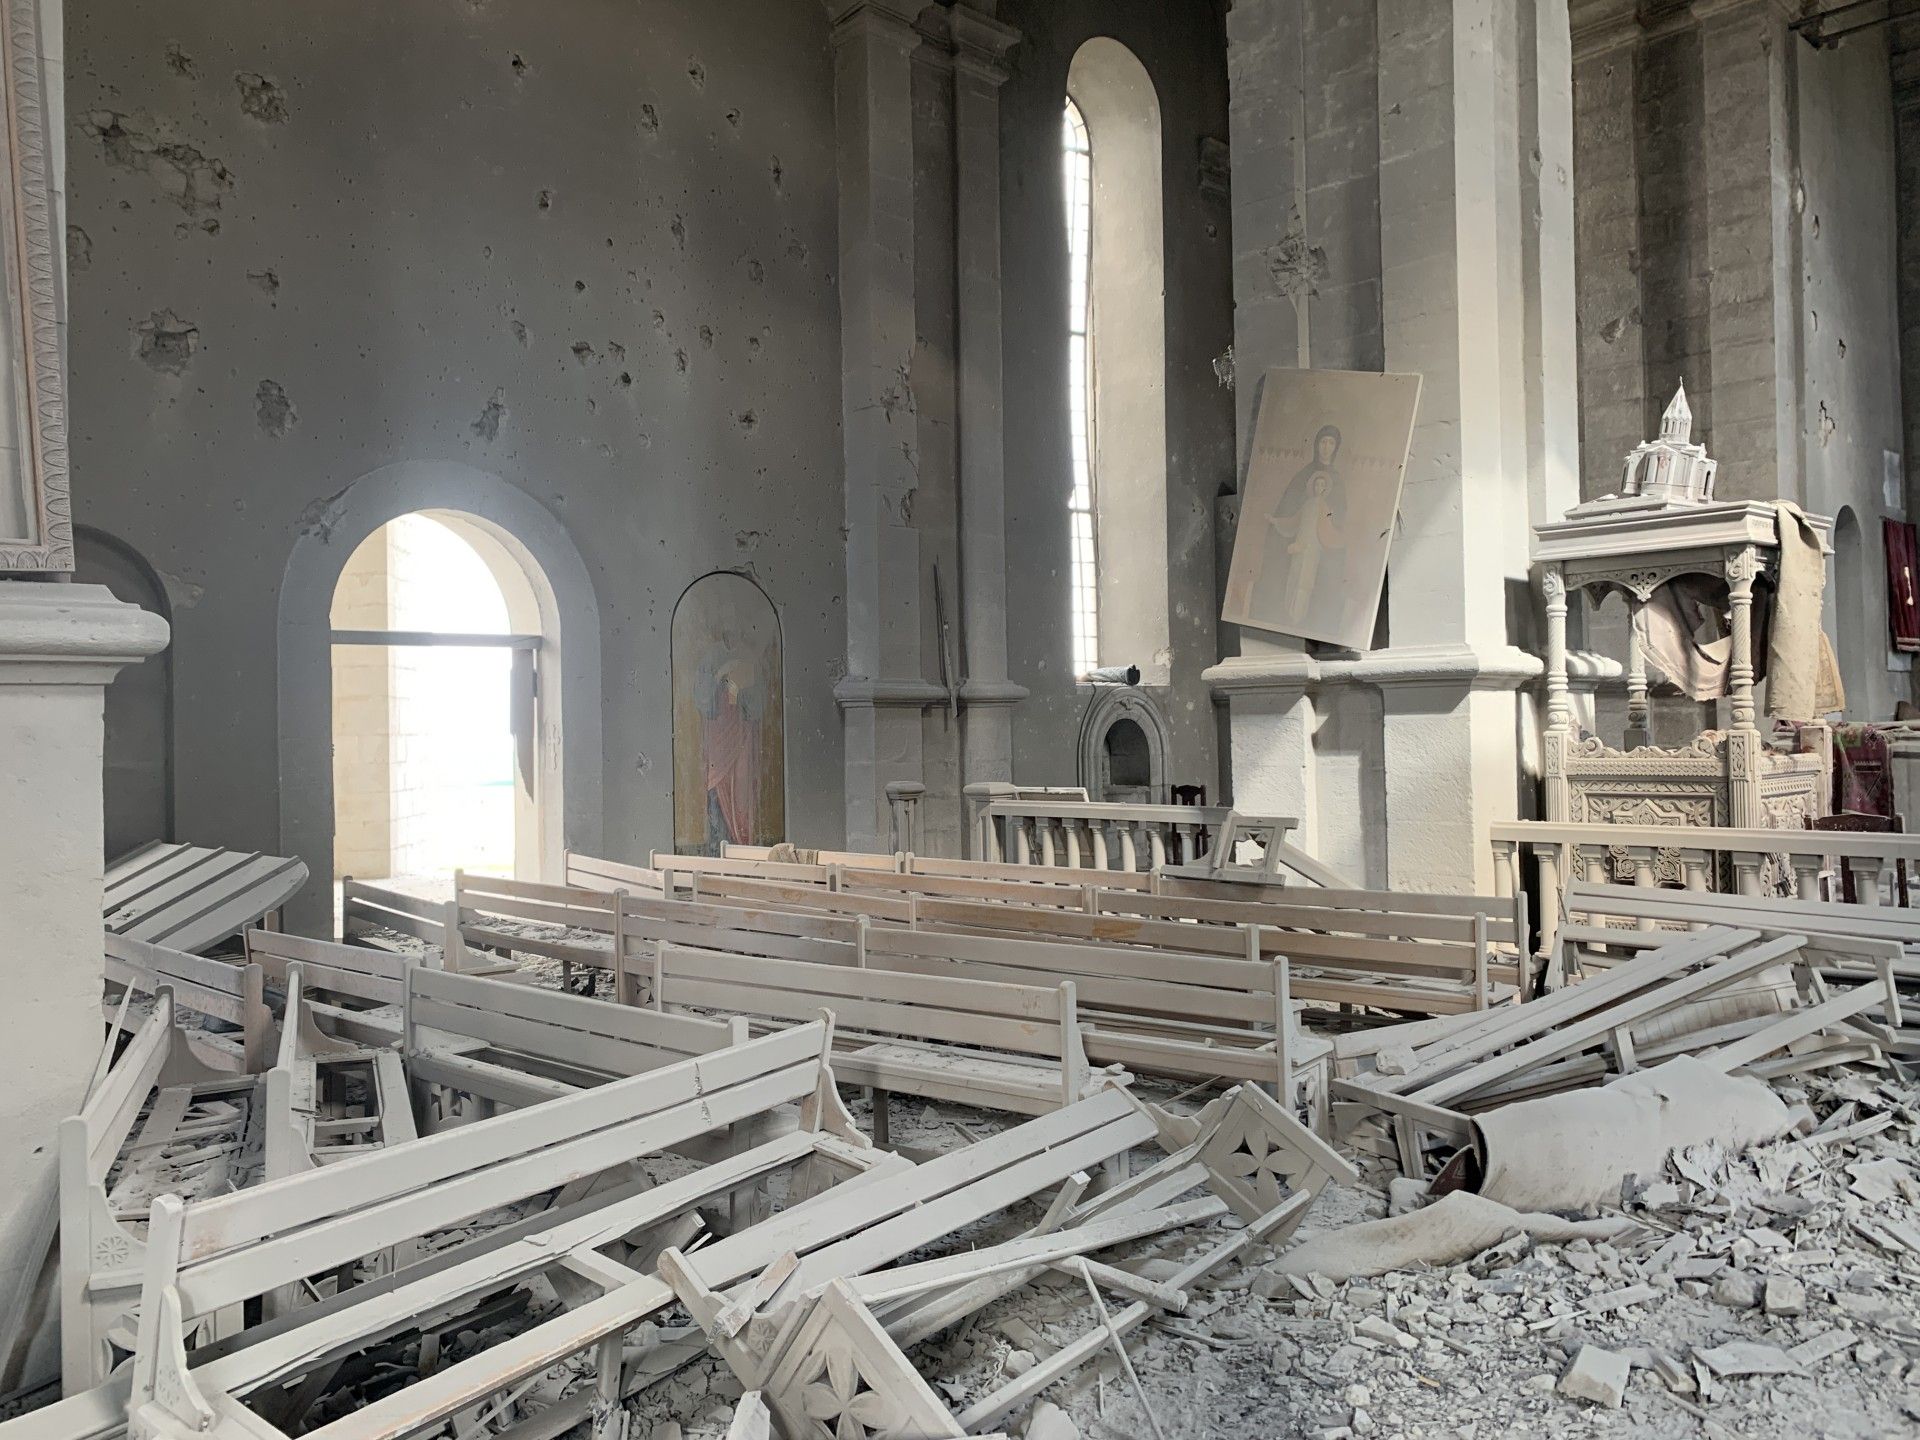 The Ghazanchetsots Cathedral in Shushi, which was hit twice with precision strikes that injured a journalist and several others. Image by Simon Ostrovsky/Newlines. Nagorno-Karabakh, 2020.

